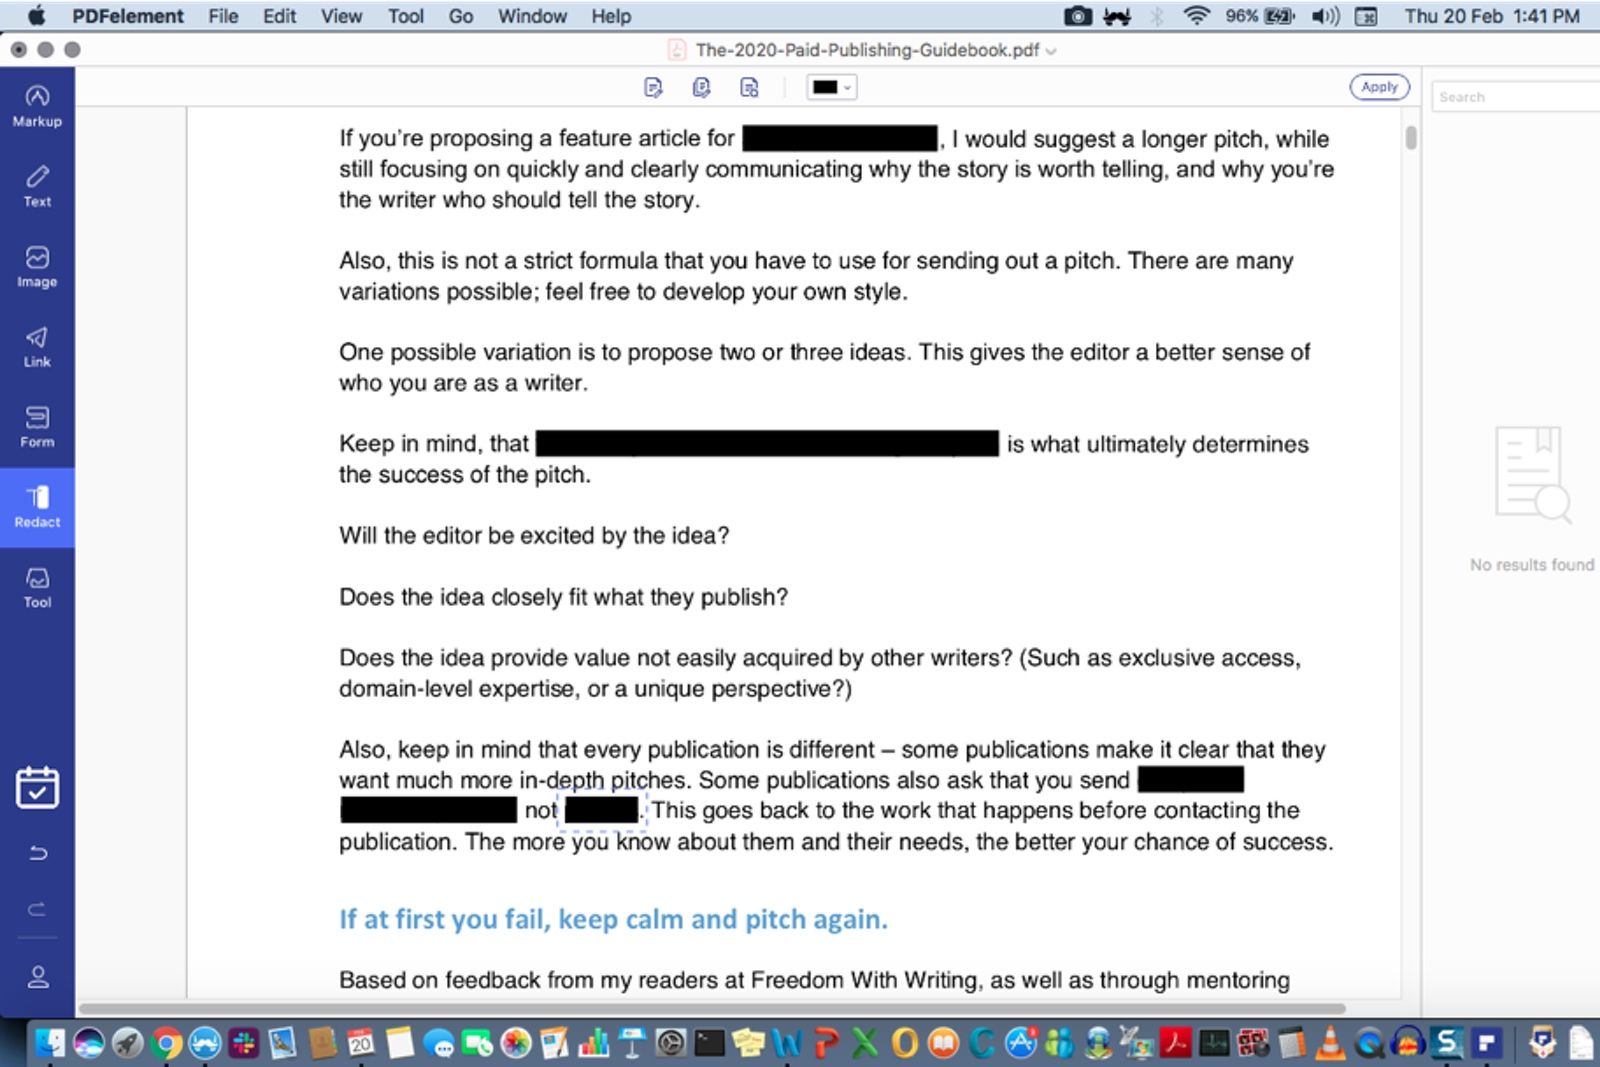 Image shows some PDF security features in PDFelement 7 Pro for Mac. For example, mark for redaction and redacted text.